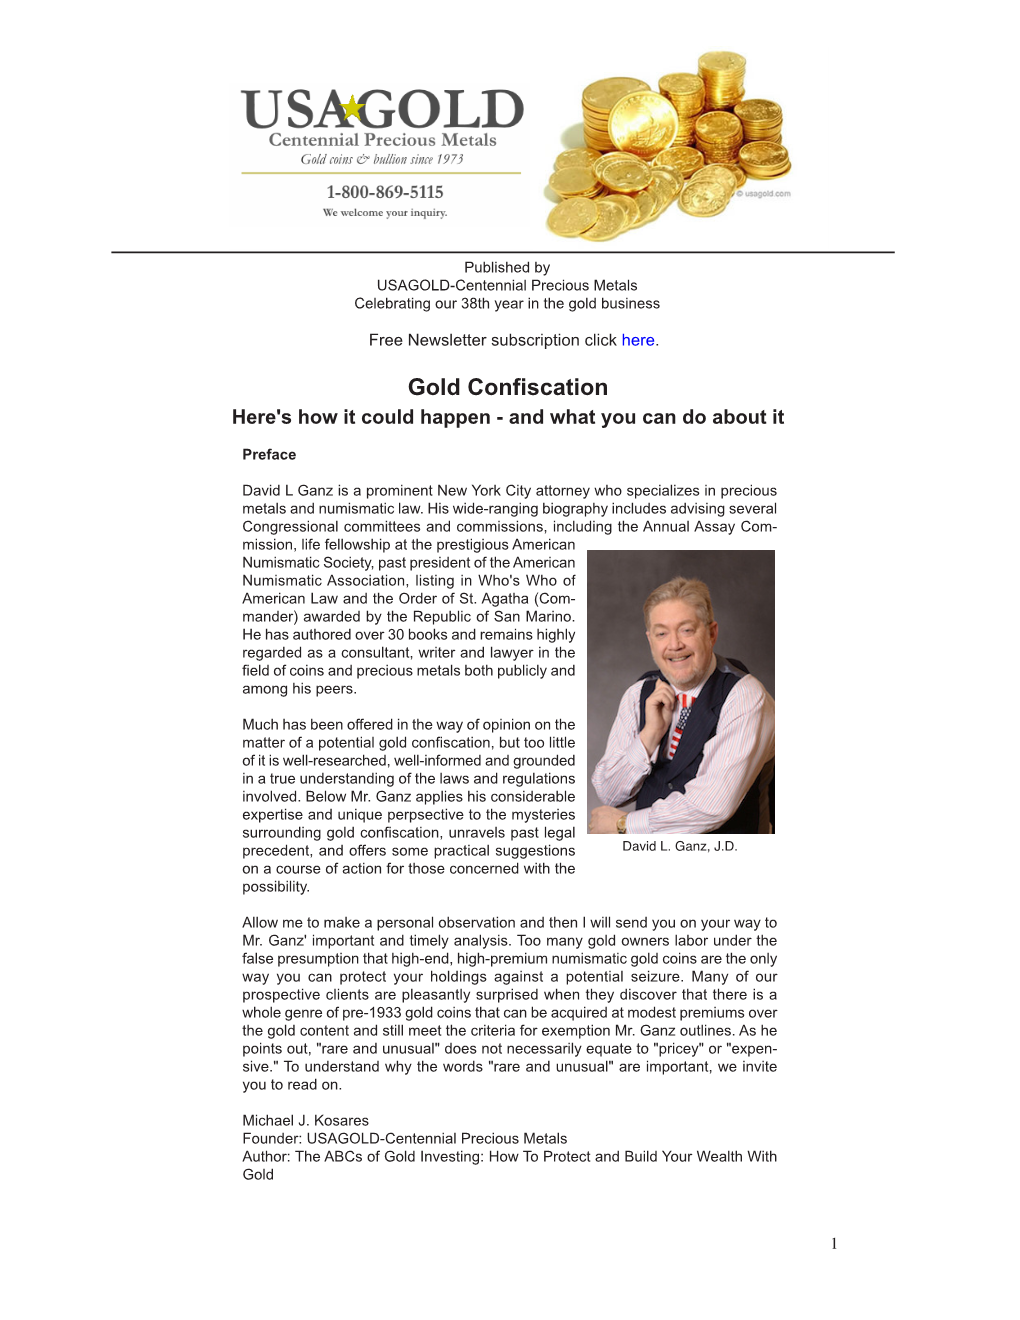 Gold Confiscation Here's How It Could Happen - and What You Can Do About It